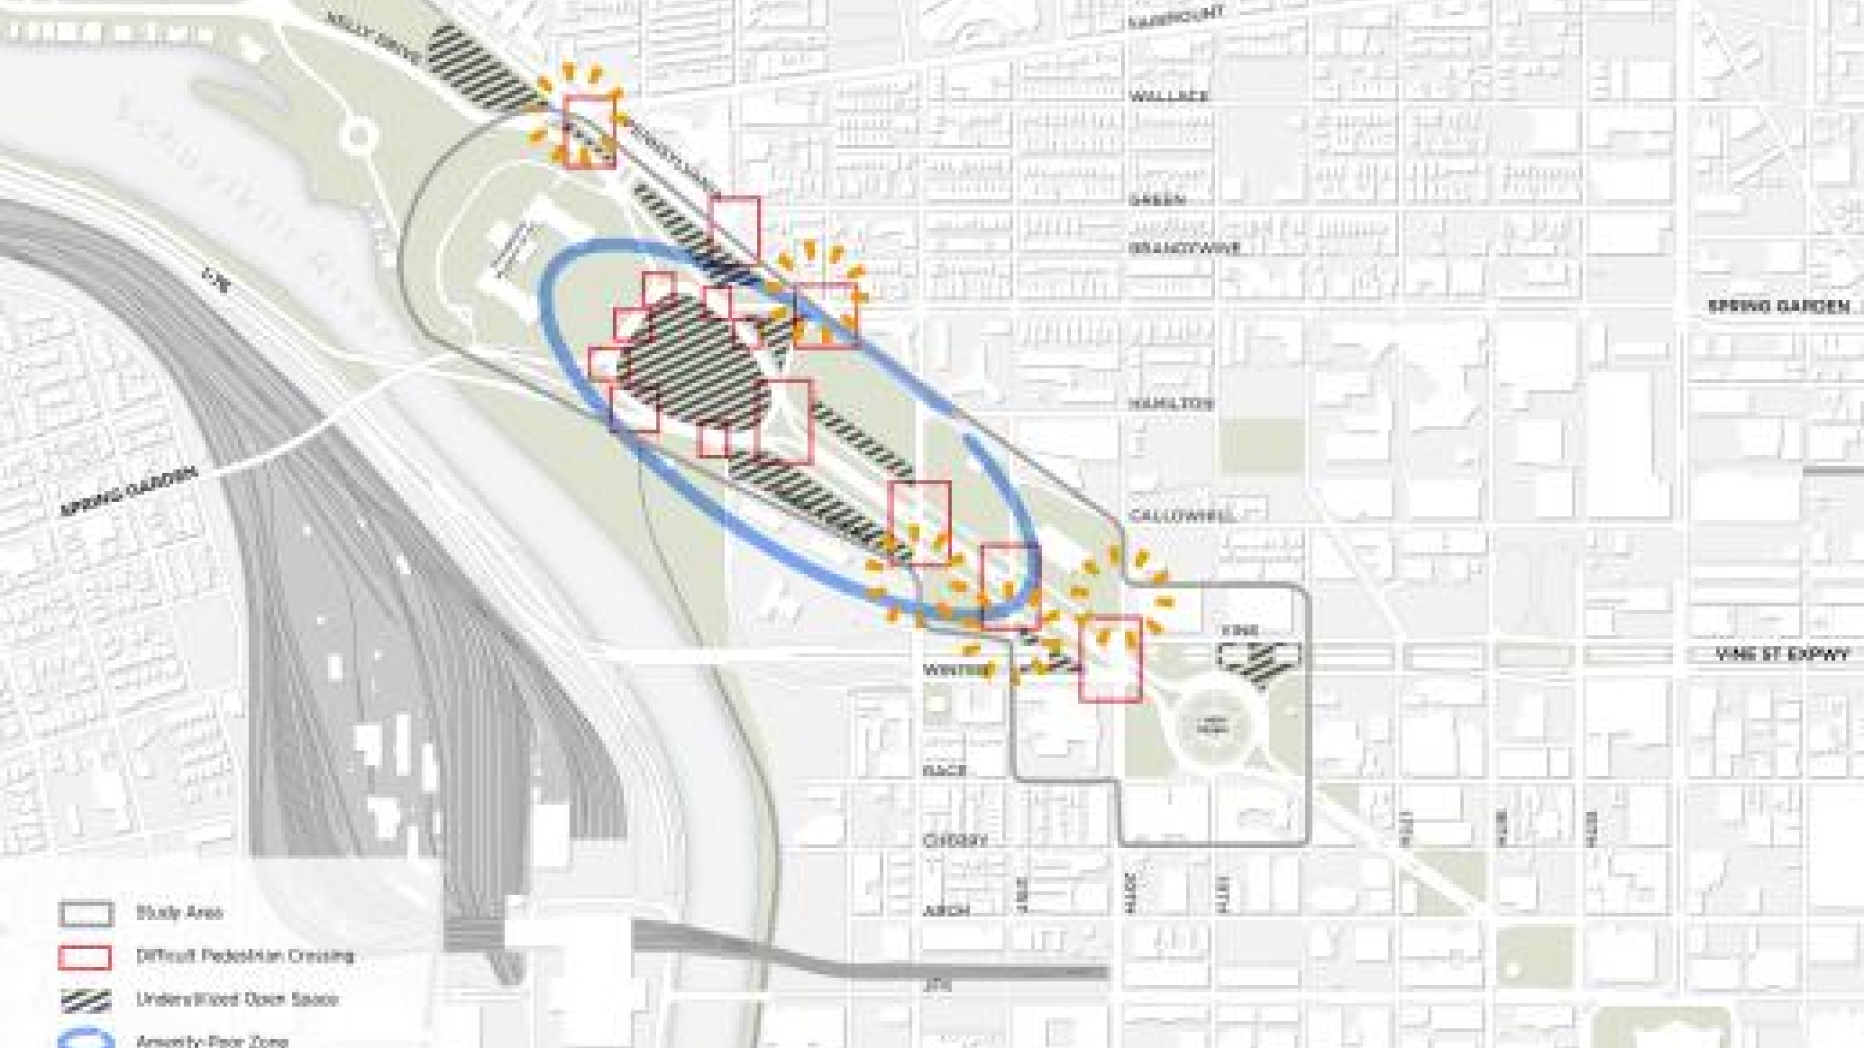 Map of Benjamin Franklin parkway with key problem areas highlighted.